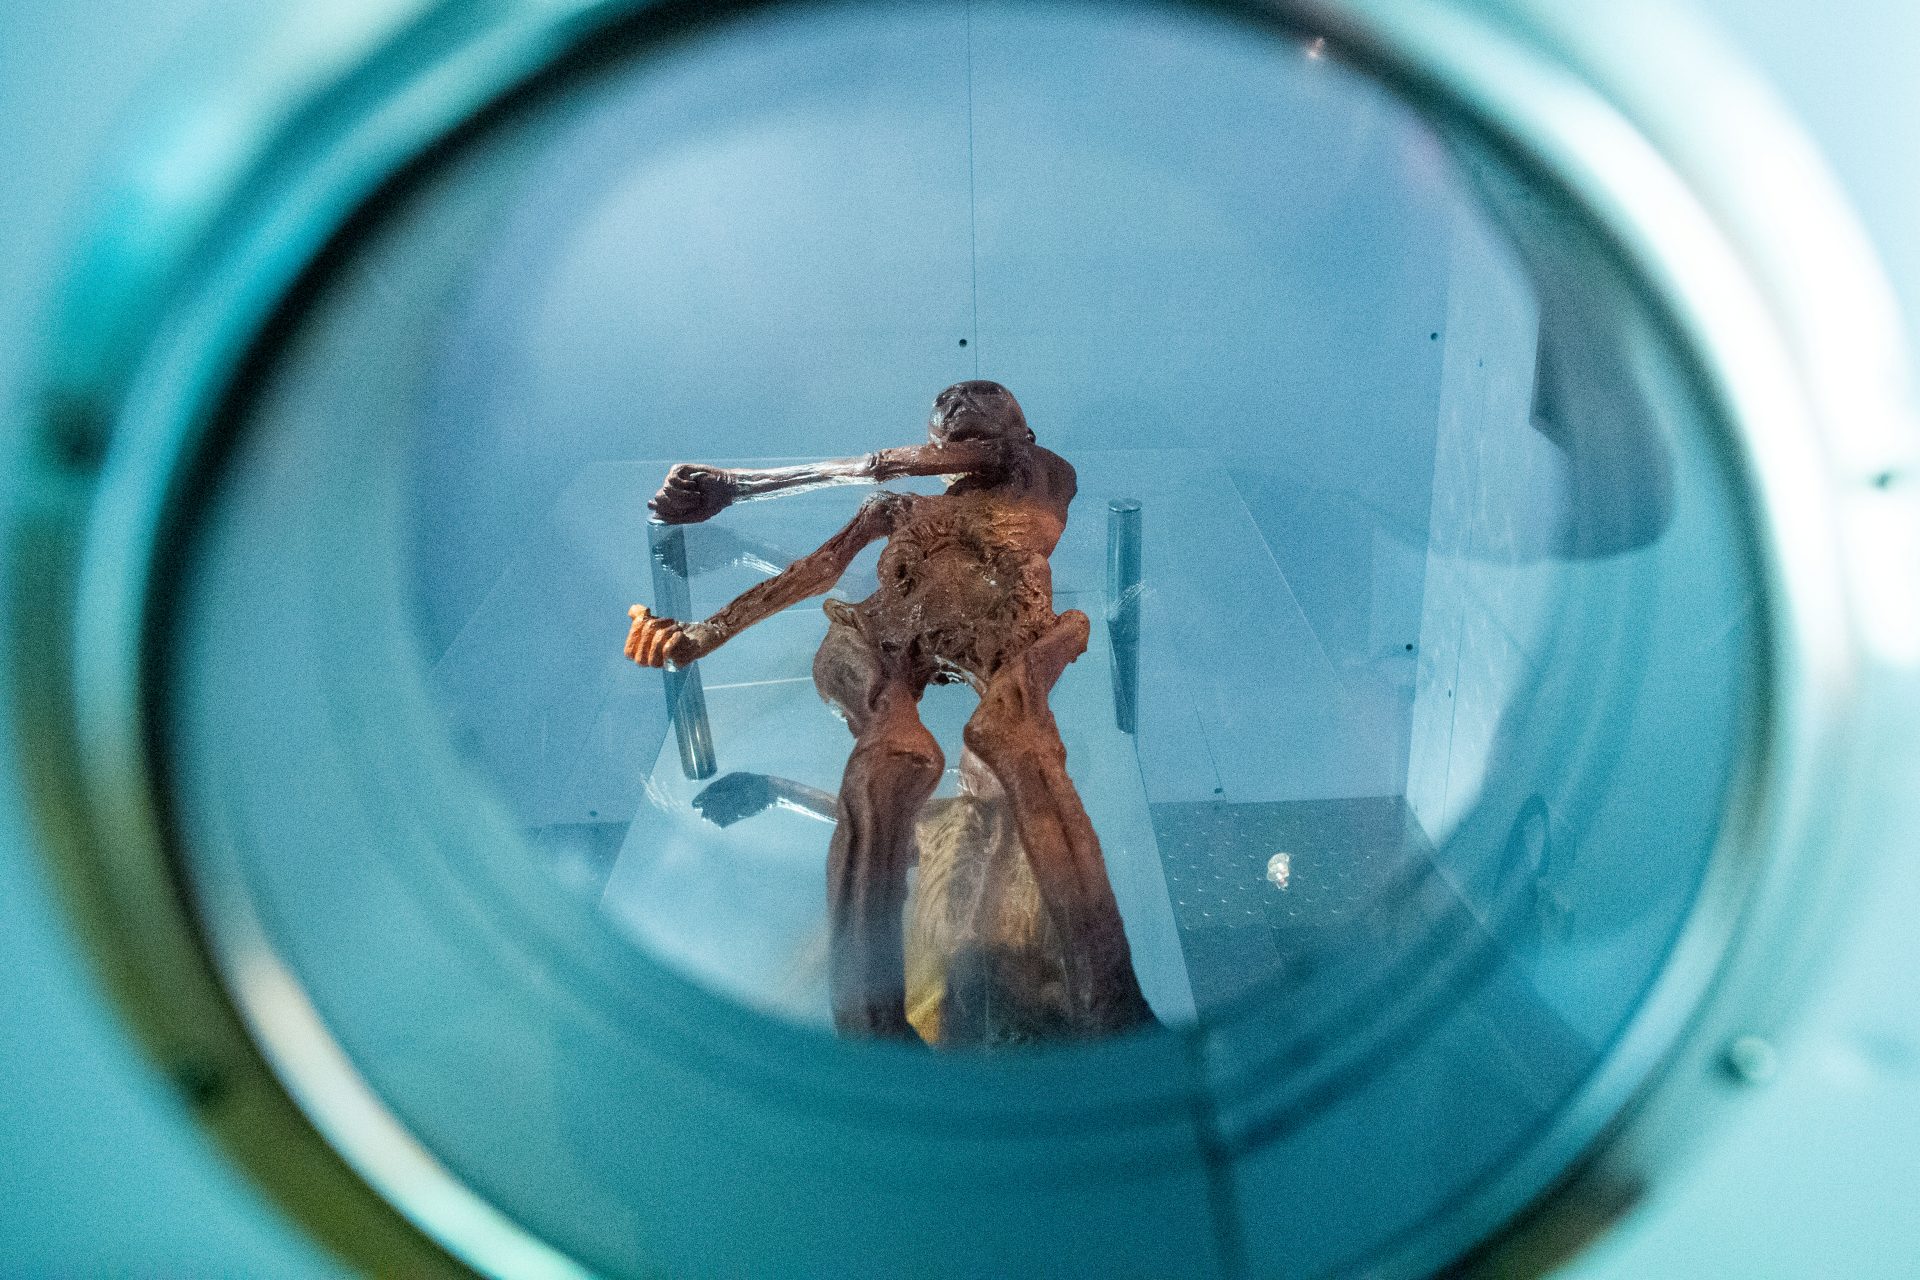 The real appearance of Ötzi the Iceman, the 5,300 year old mummy